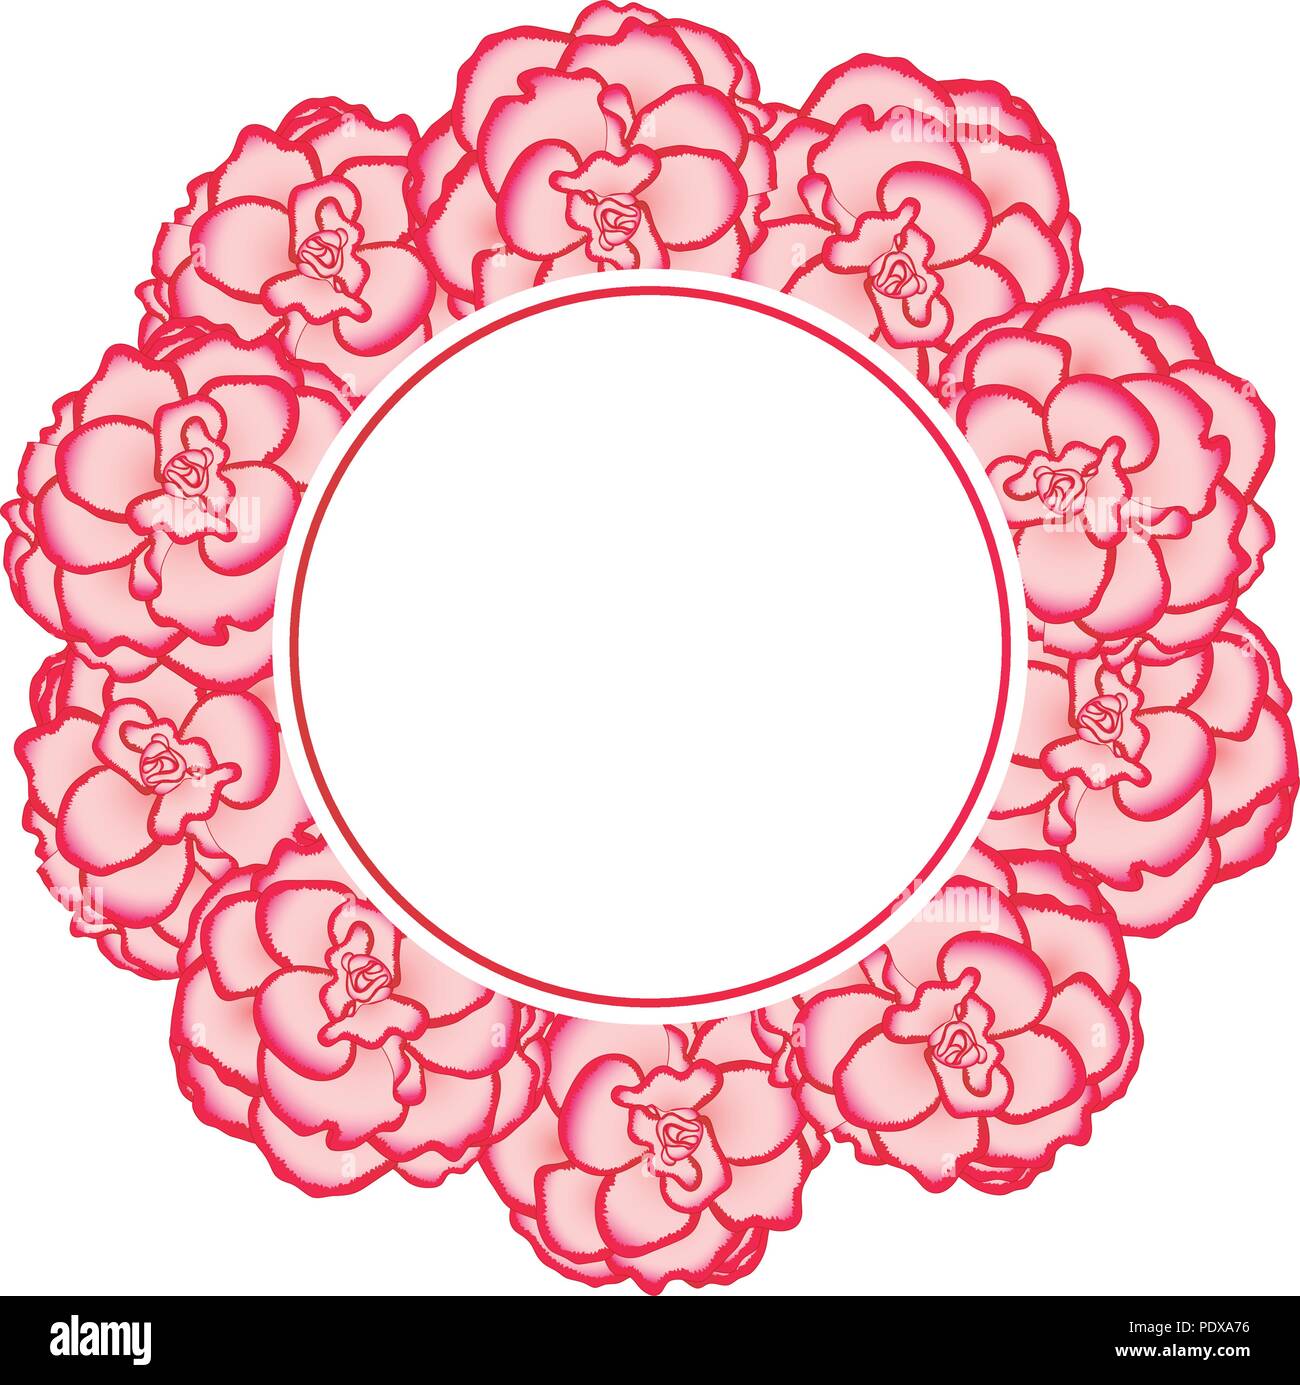 Pink Begonia Flower, Picotee First Love Banner Wreath. Vector Illustration. Stock Vector